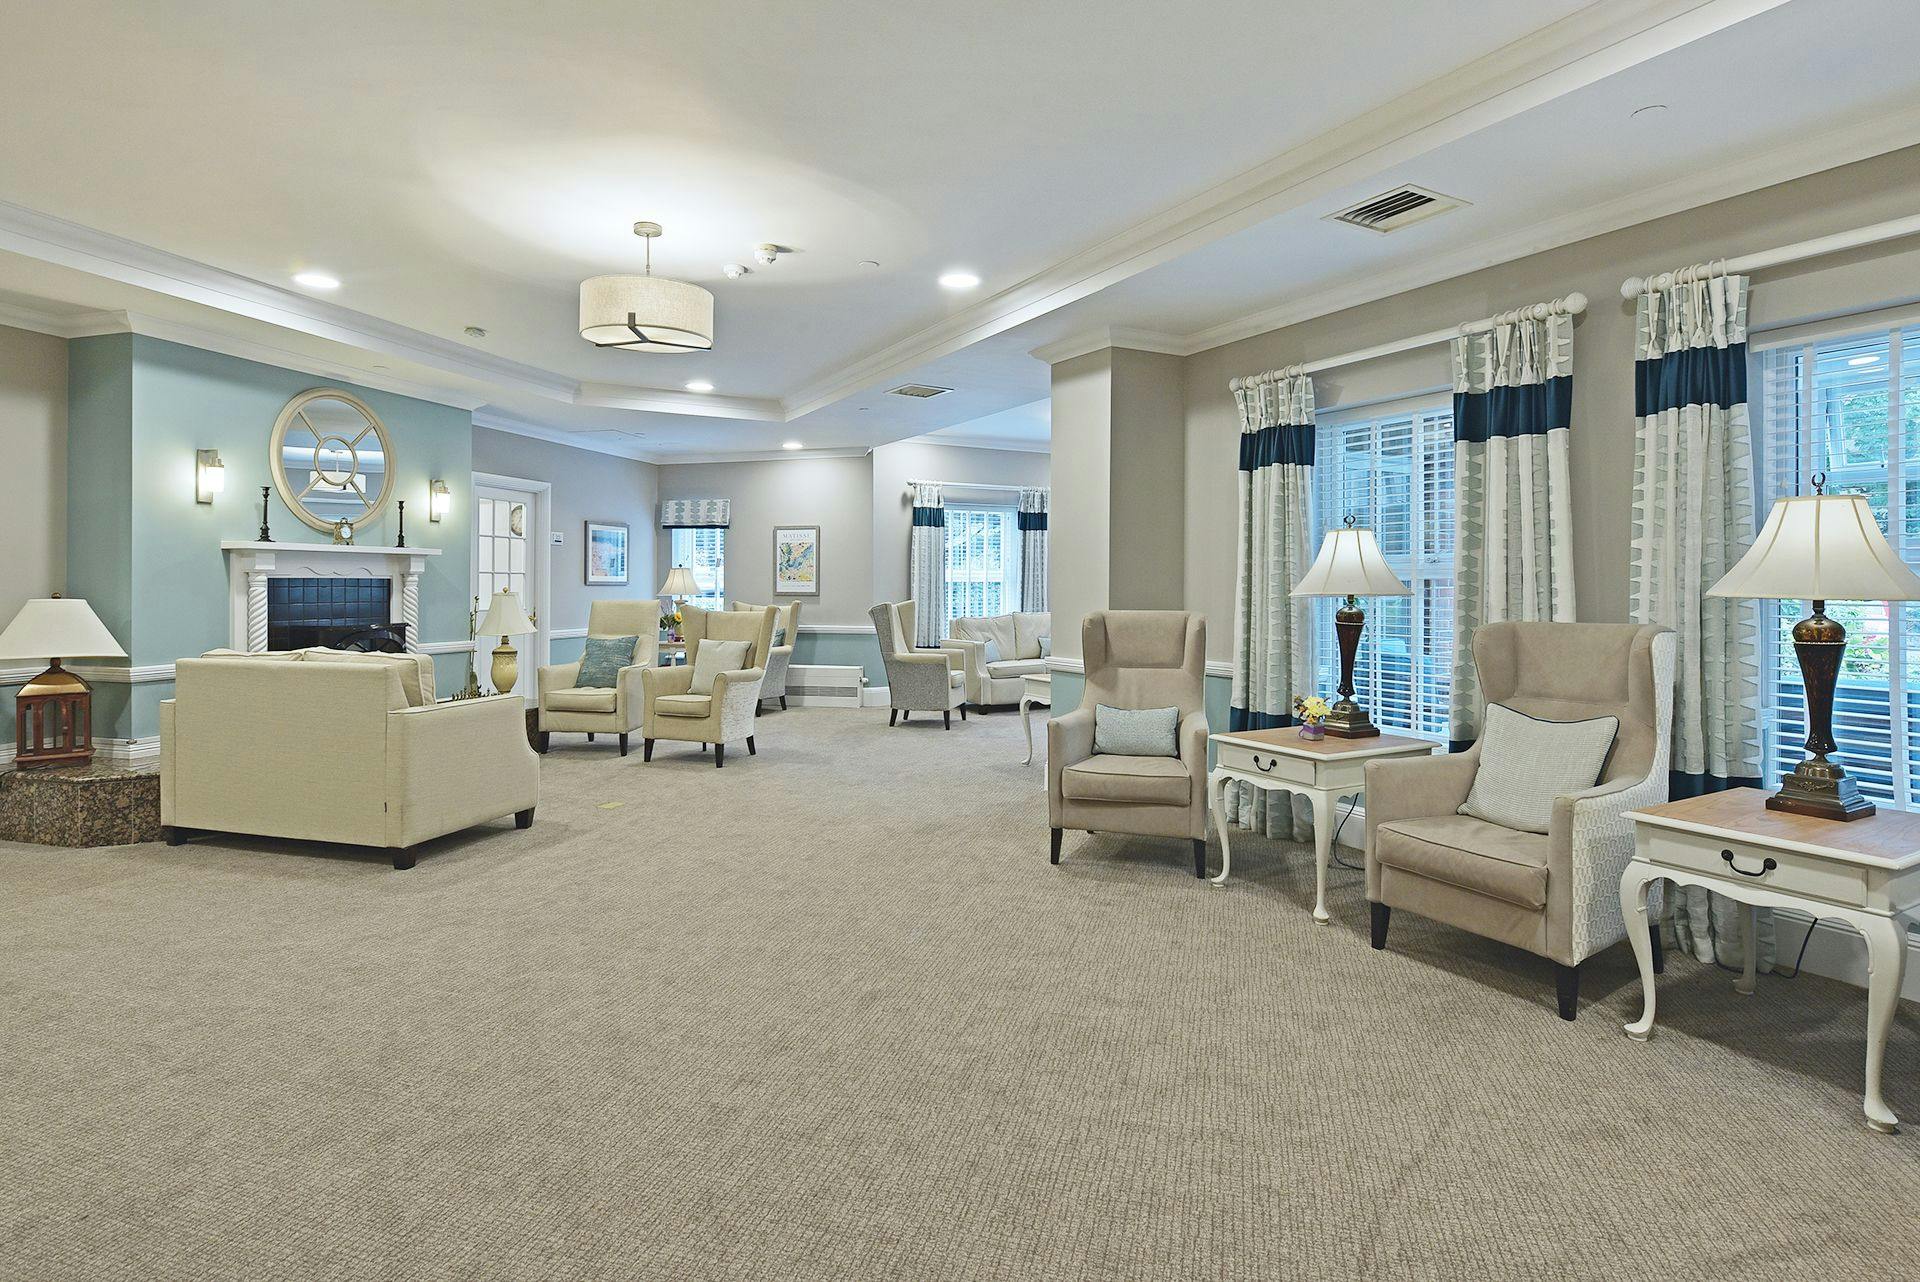 Lounge of Westbourne Tower care home in Bournemouth, Hampshire